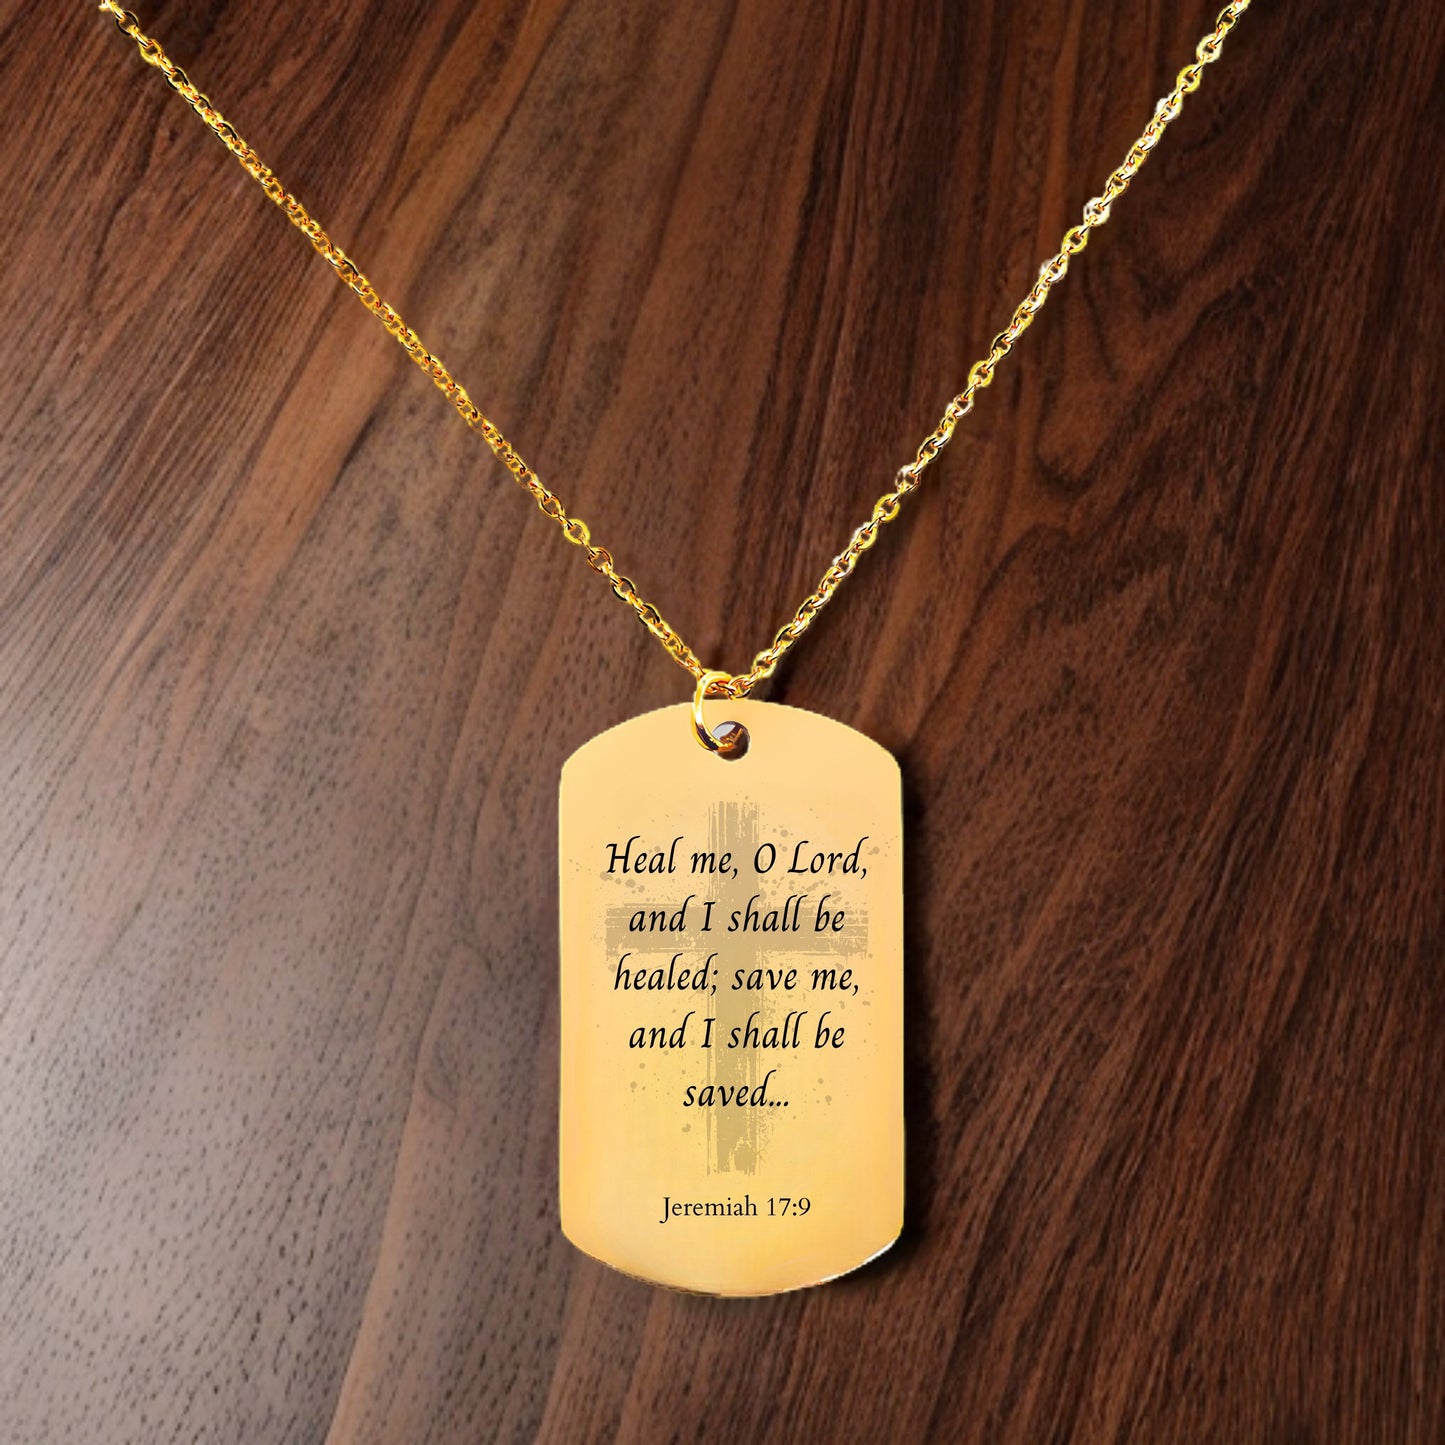 Jeremiah 9 17 quote necklace, gold bible verse, 14k gold cross charm necklace, confirmation gift, gold bar tag necklace,religious scripture